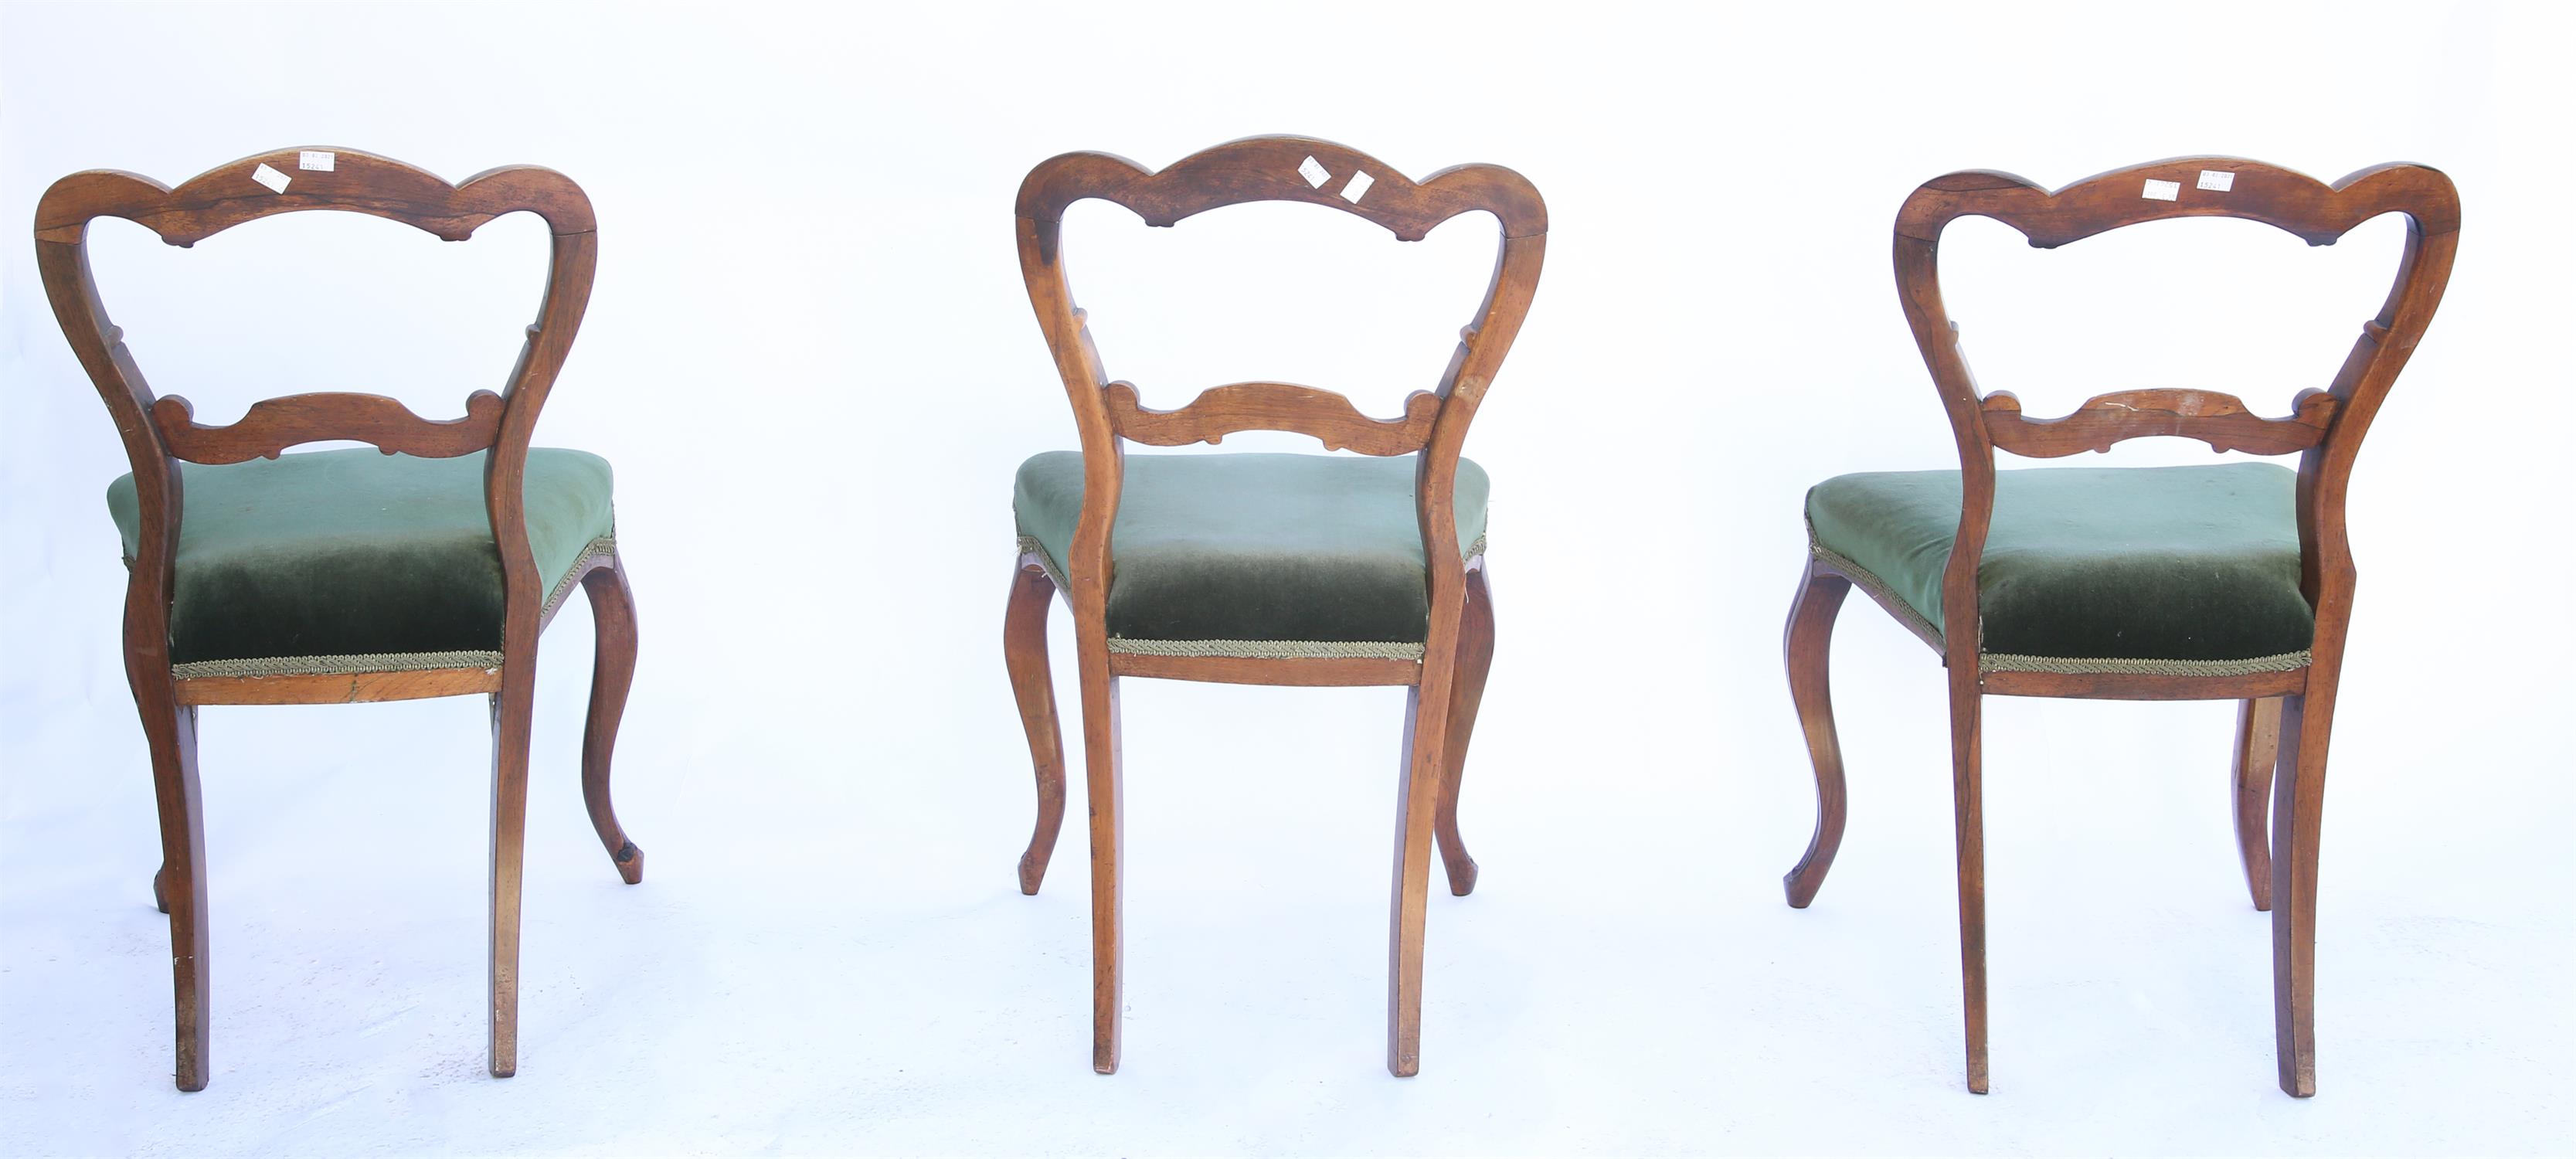 Set of six Victorian rosewood dining chairs, with pierced and shaped backrests, on cabriole legs (6) - Image 3 of 3